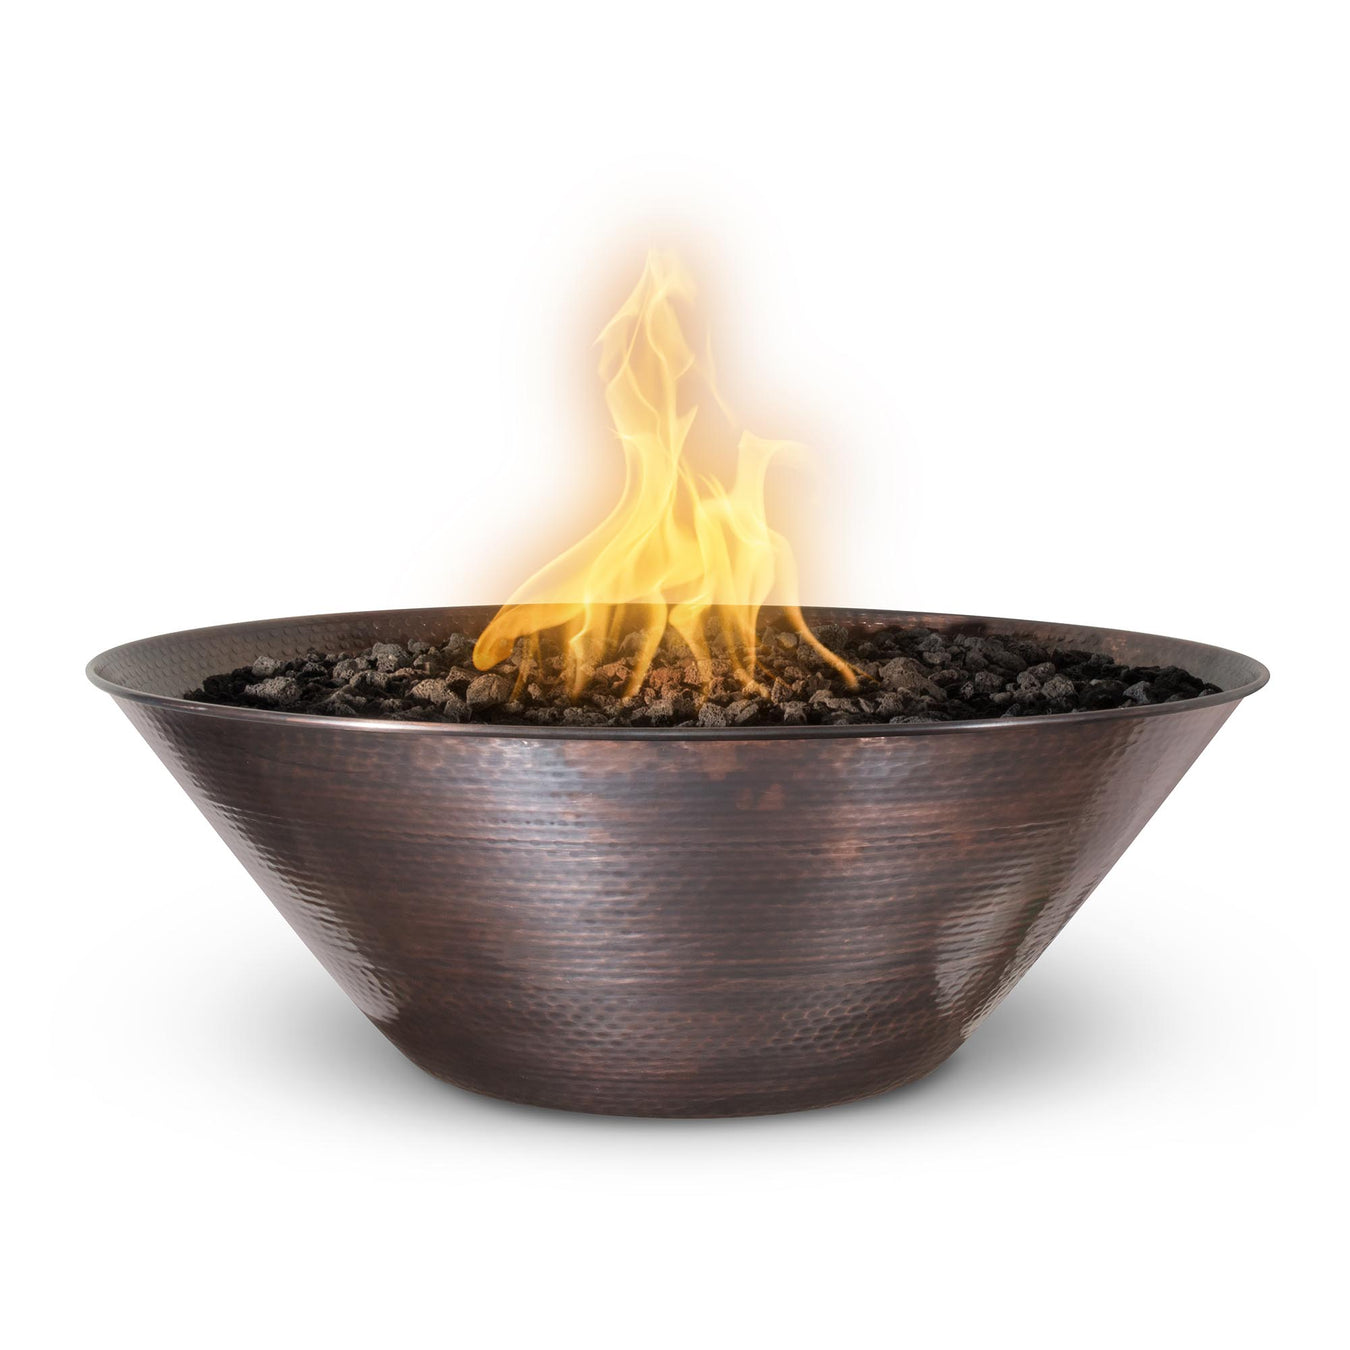 The Outdoor Plus Remi fire bowl featuring a 31-inch round hammered copper design, with a lively flame at the center surrounded by dark lava rocks in white background